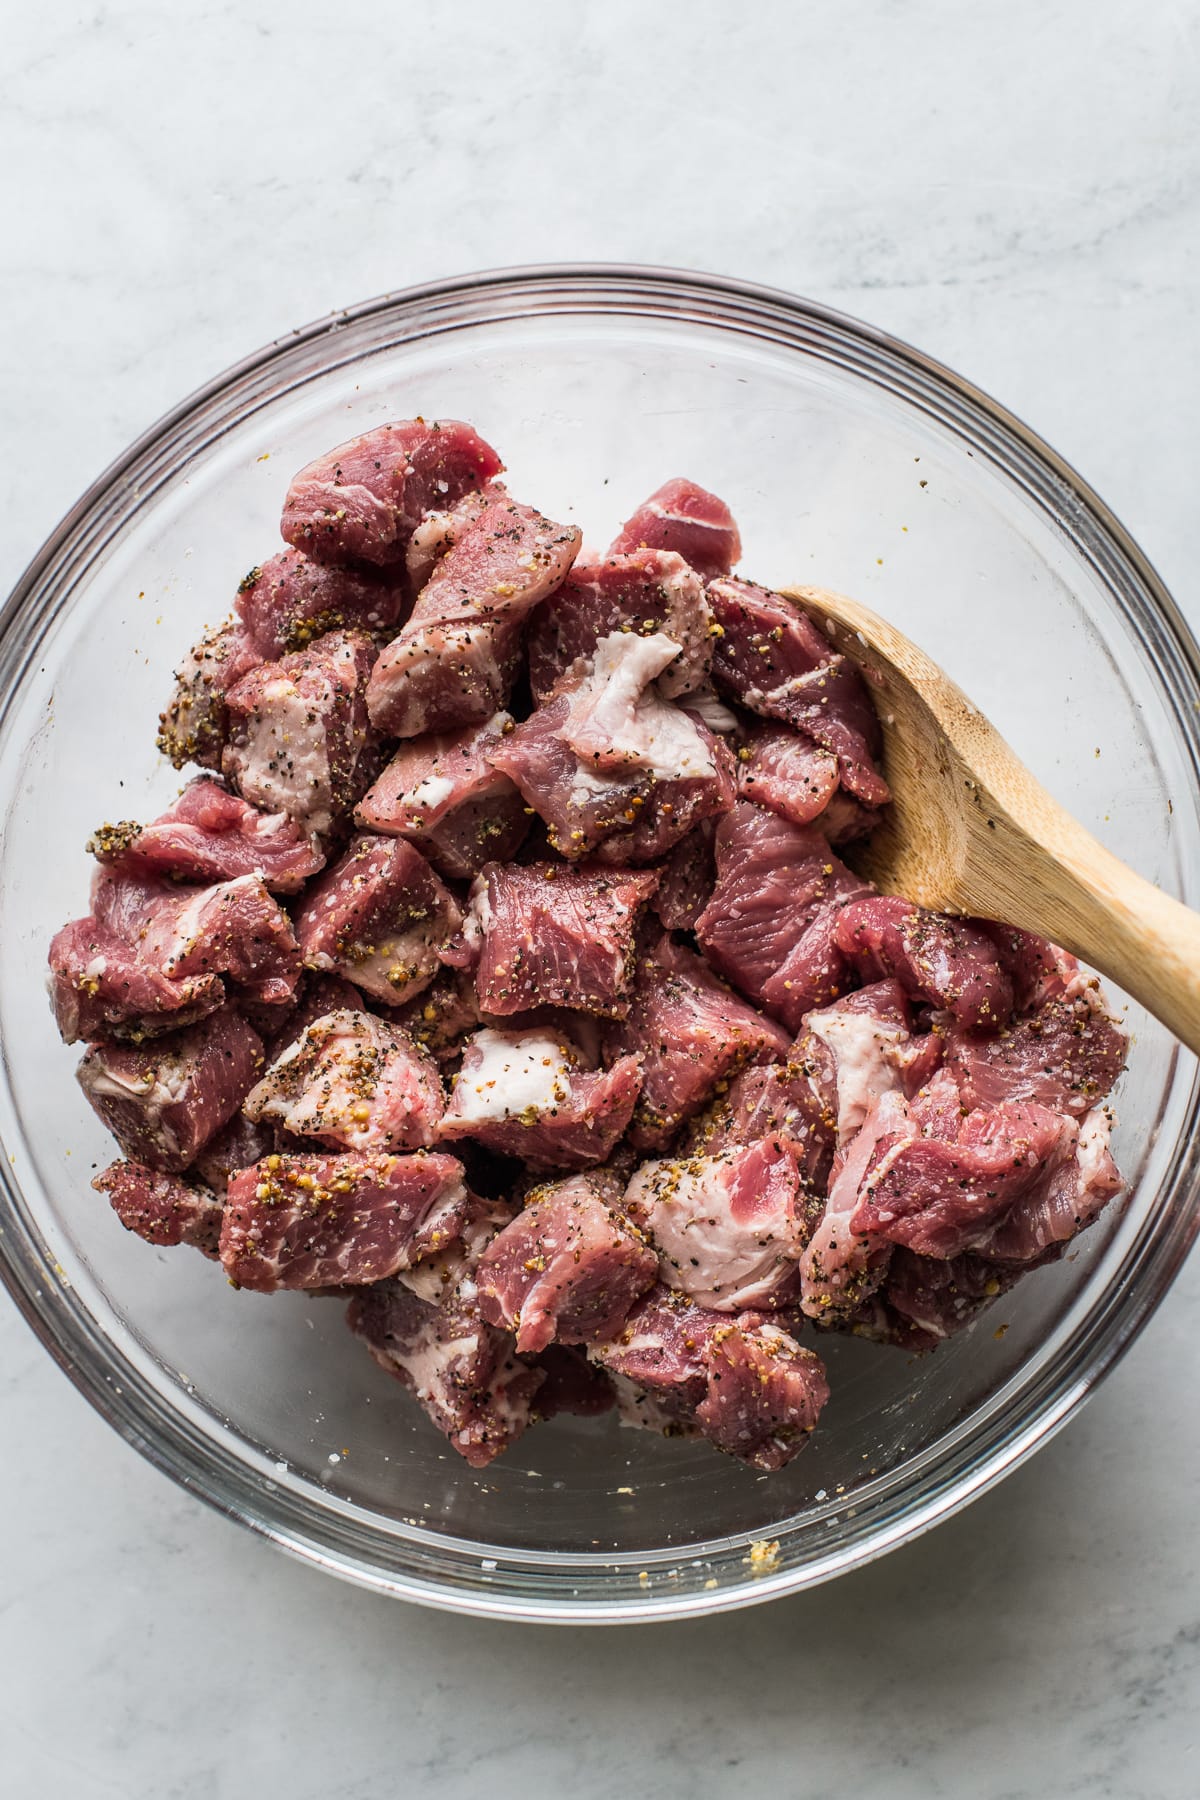 Chunks of pork shoulder in a bowl seasoned with salt, pepper, and coarse-ground mustard.